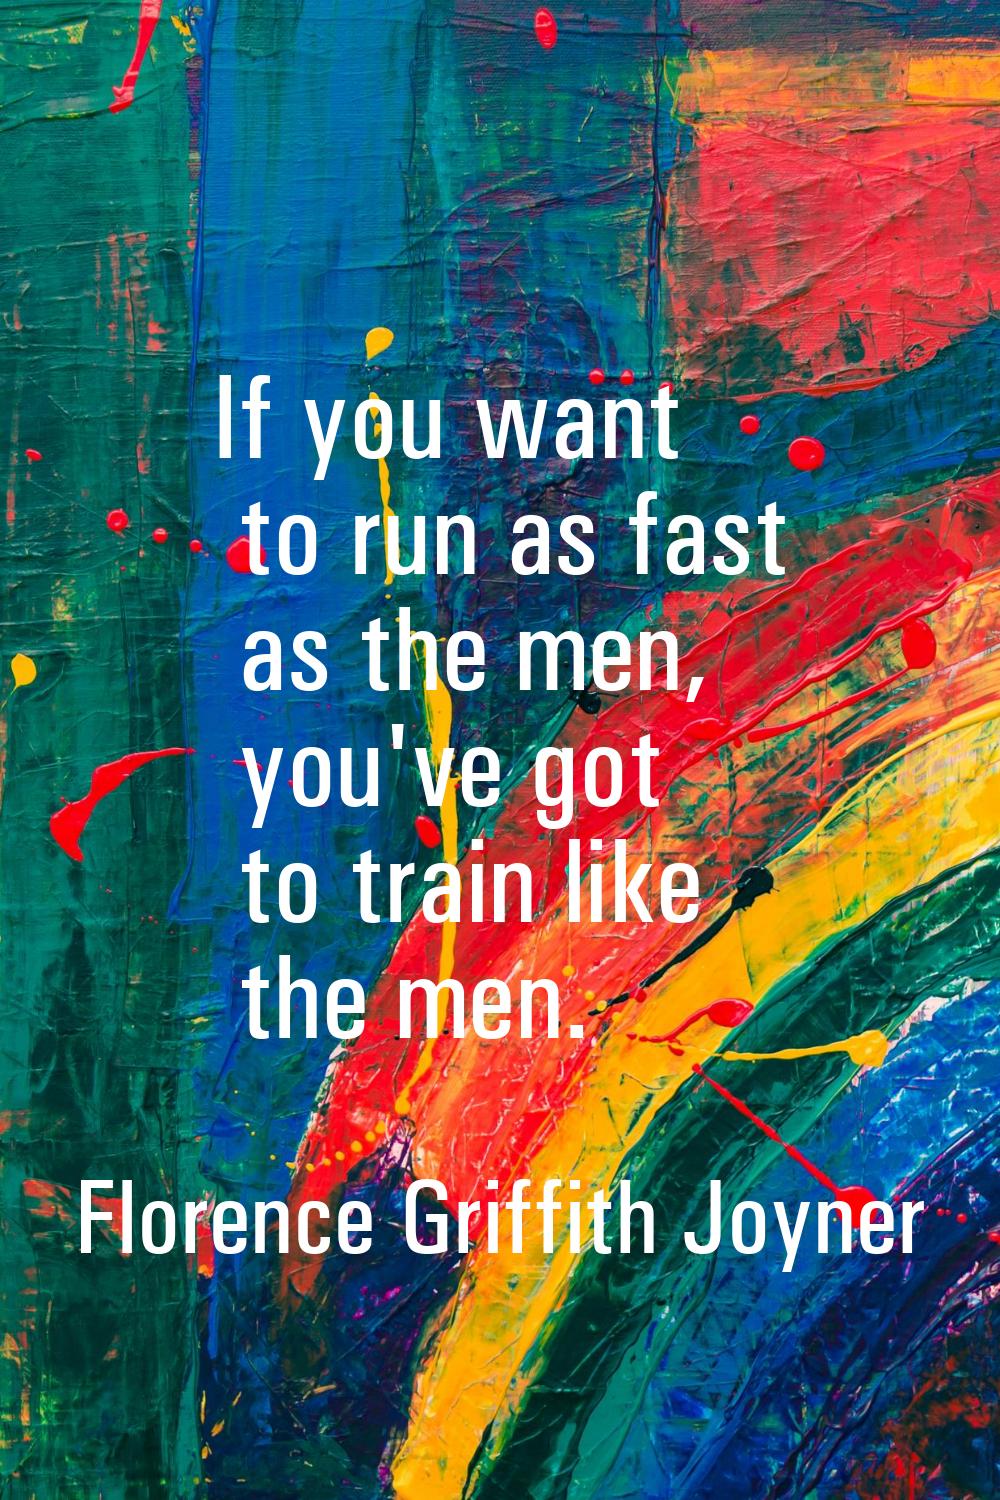 If you want to run as fast as the men, you've got to train like the men.